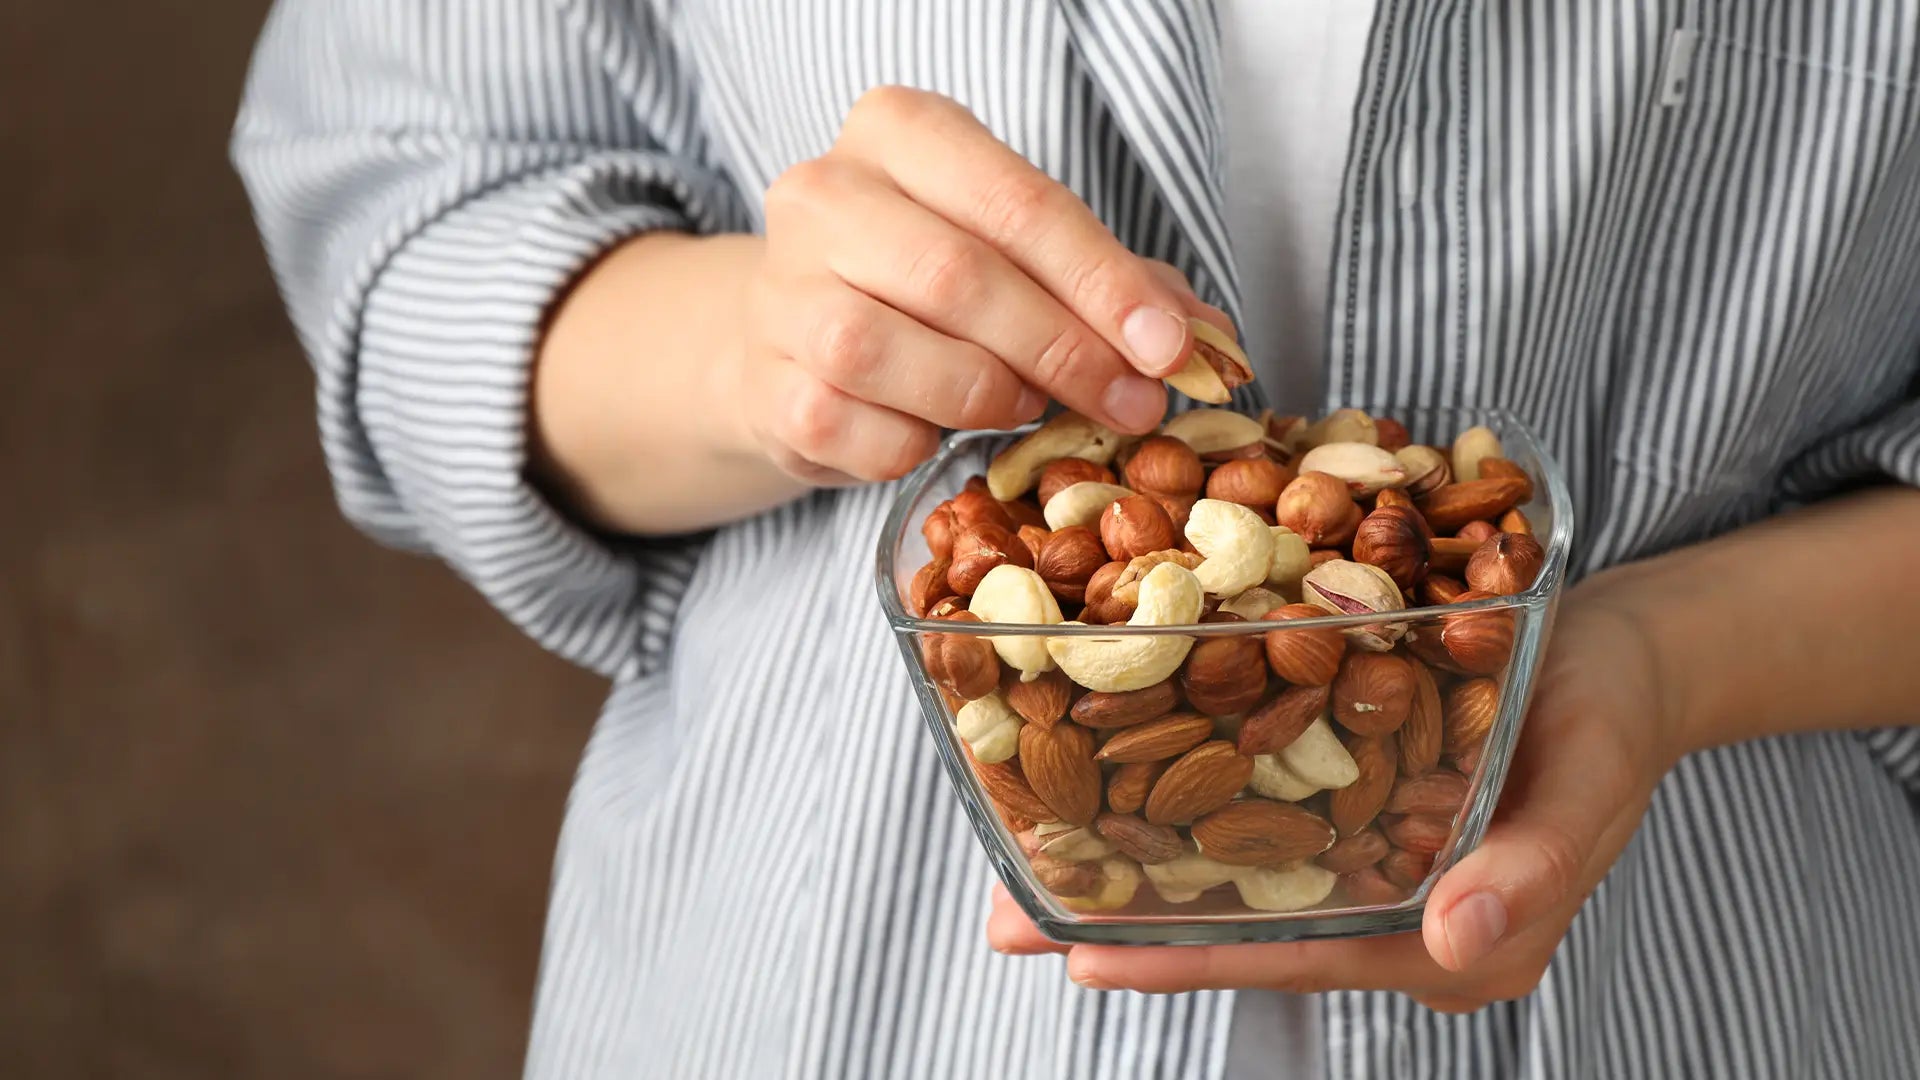 How do Dry fruits, Nuts benefit your children’s health